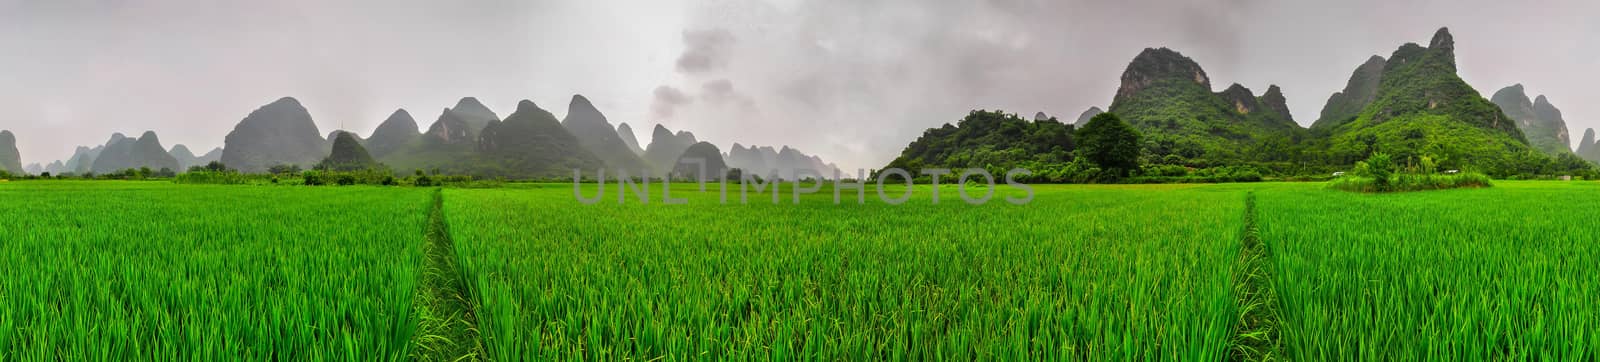 Yangshuo Parorama ricefields, karst mountain landscape and green, guilin, China